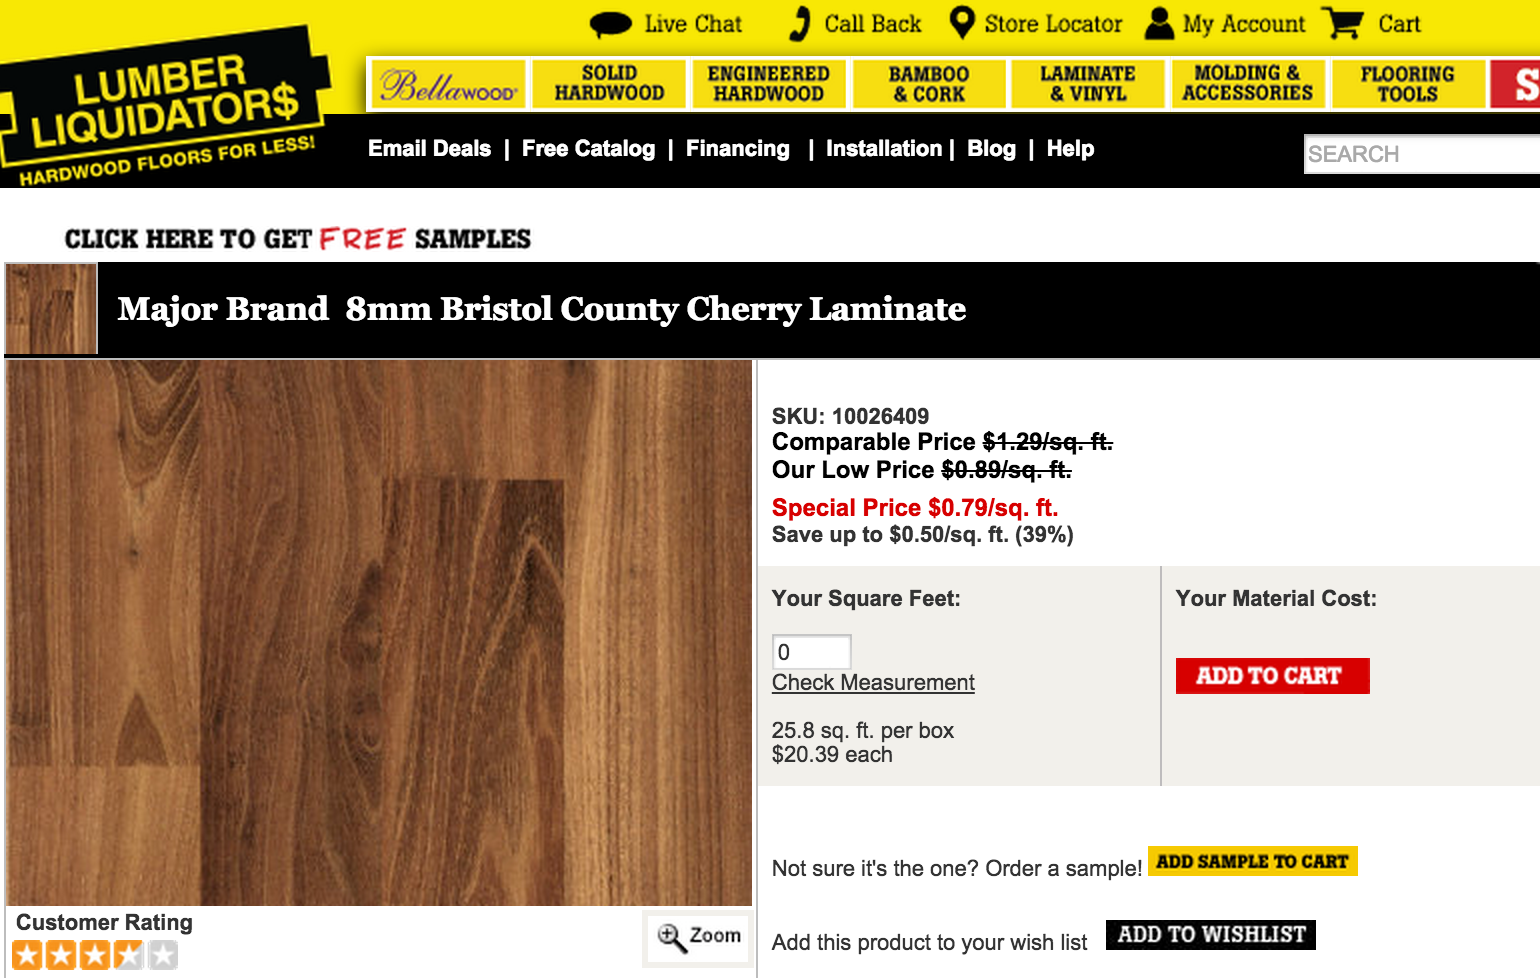 Lumber Liquidators Faces Federal Charges Of Selling Illegally Sourced Wood